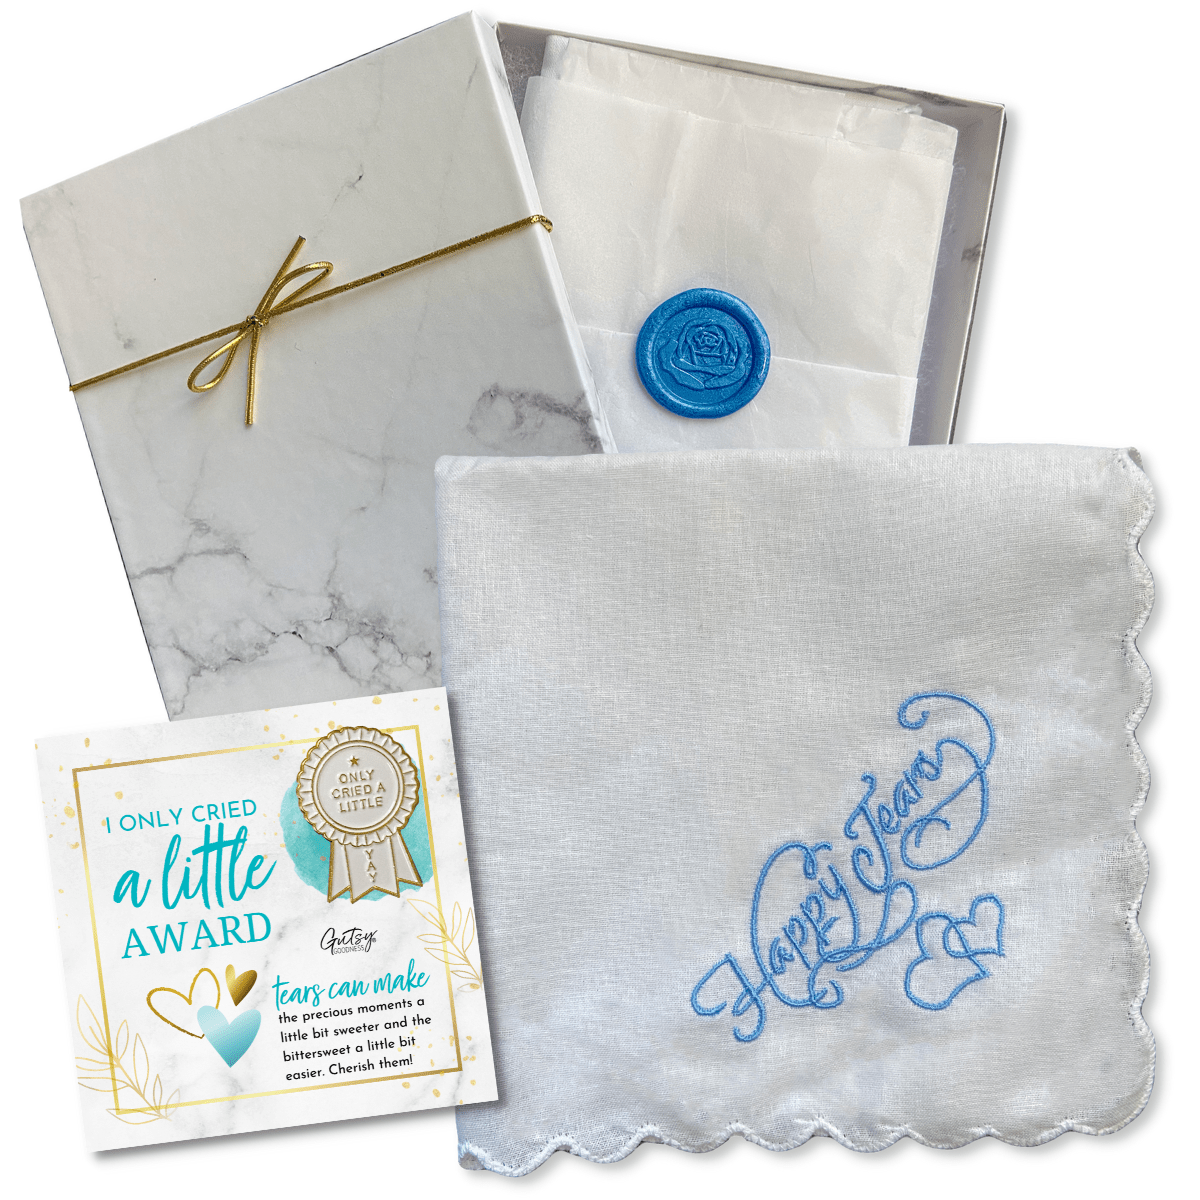 Sentimental Happy Tears Bundle Handkerchief Embroidered Only Cried a Little Pin Gift Packaging Special Occasion Keepsake   - Gutsy Goodness Handmade Jewelry